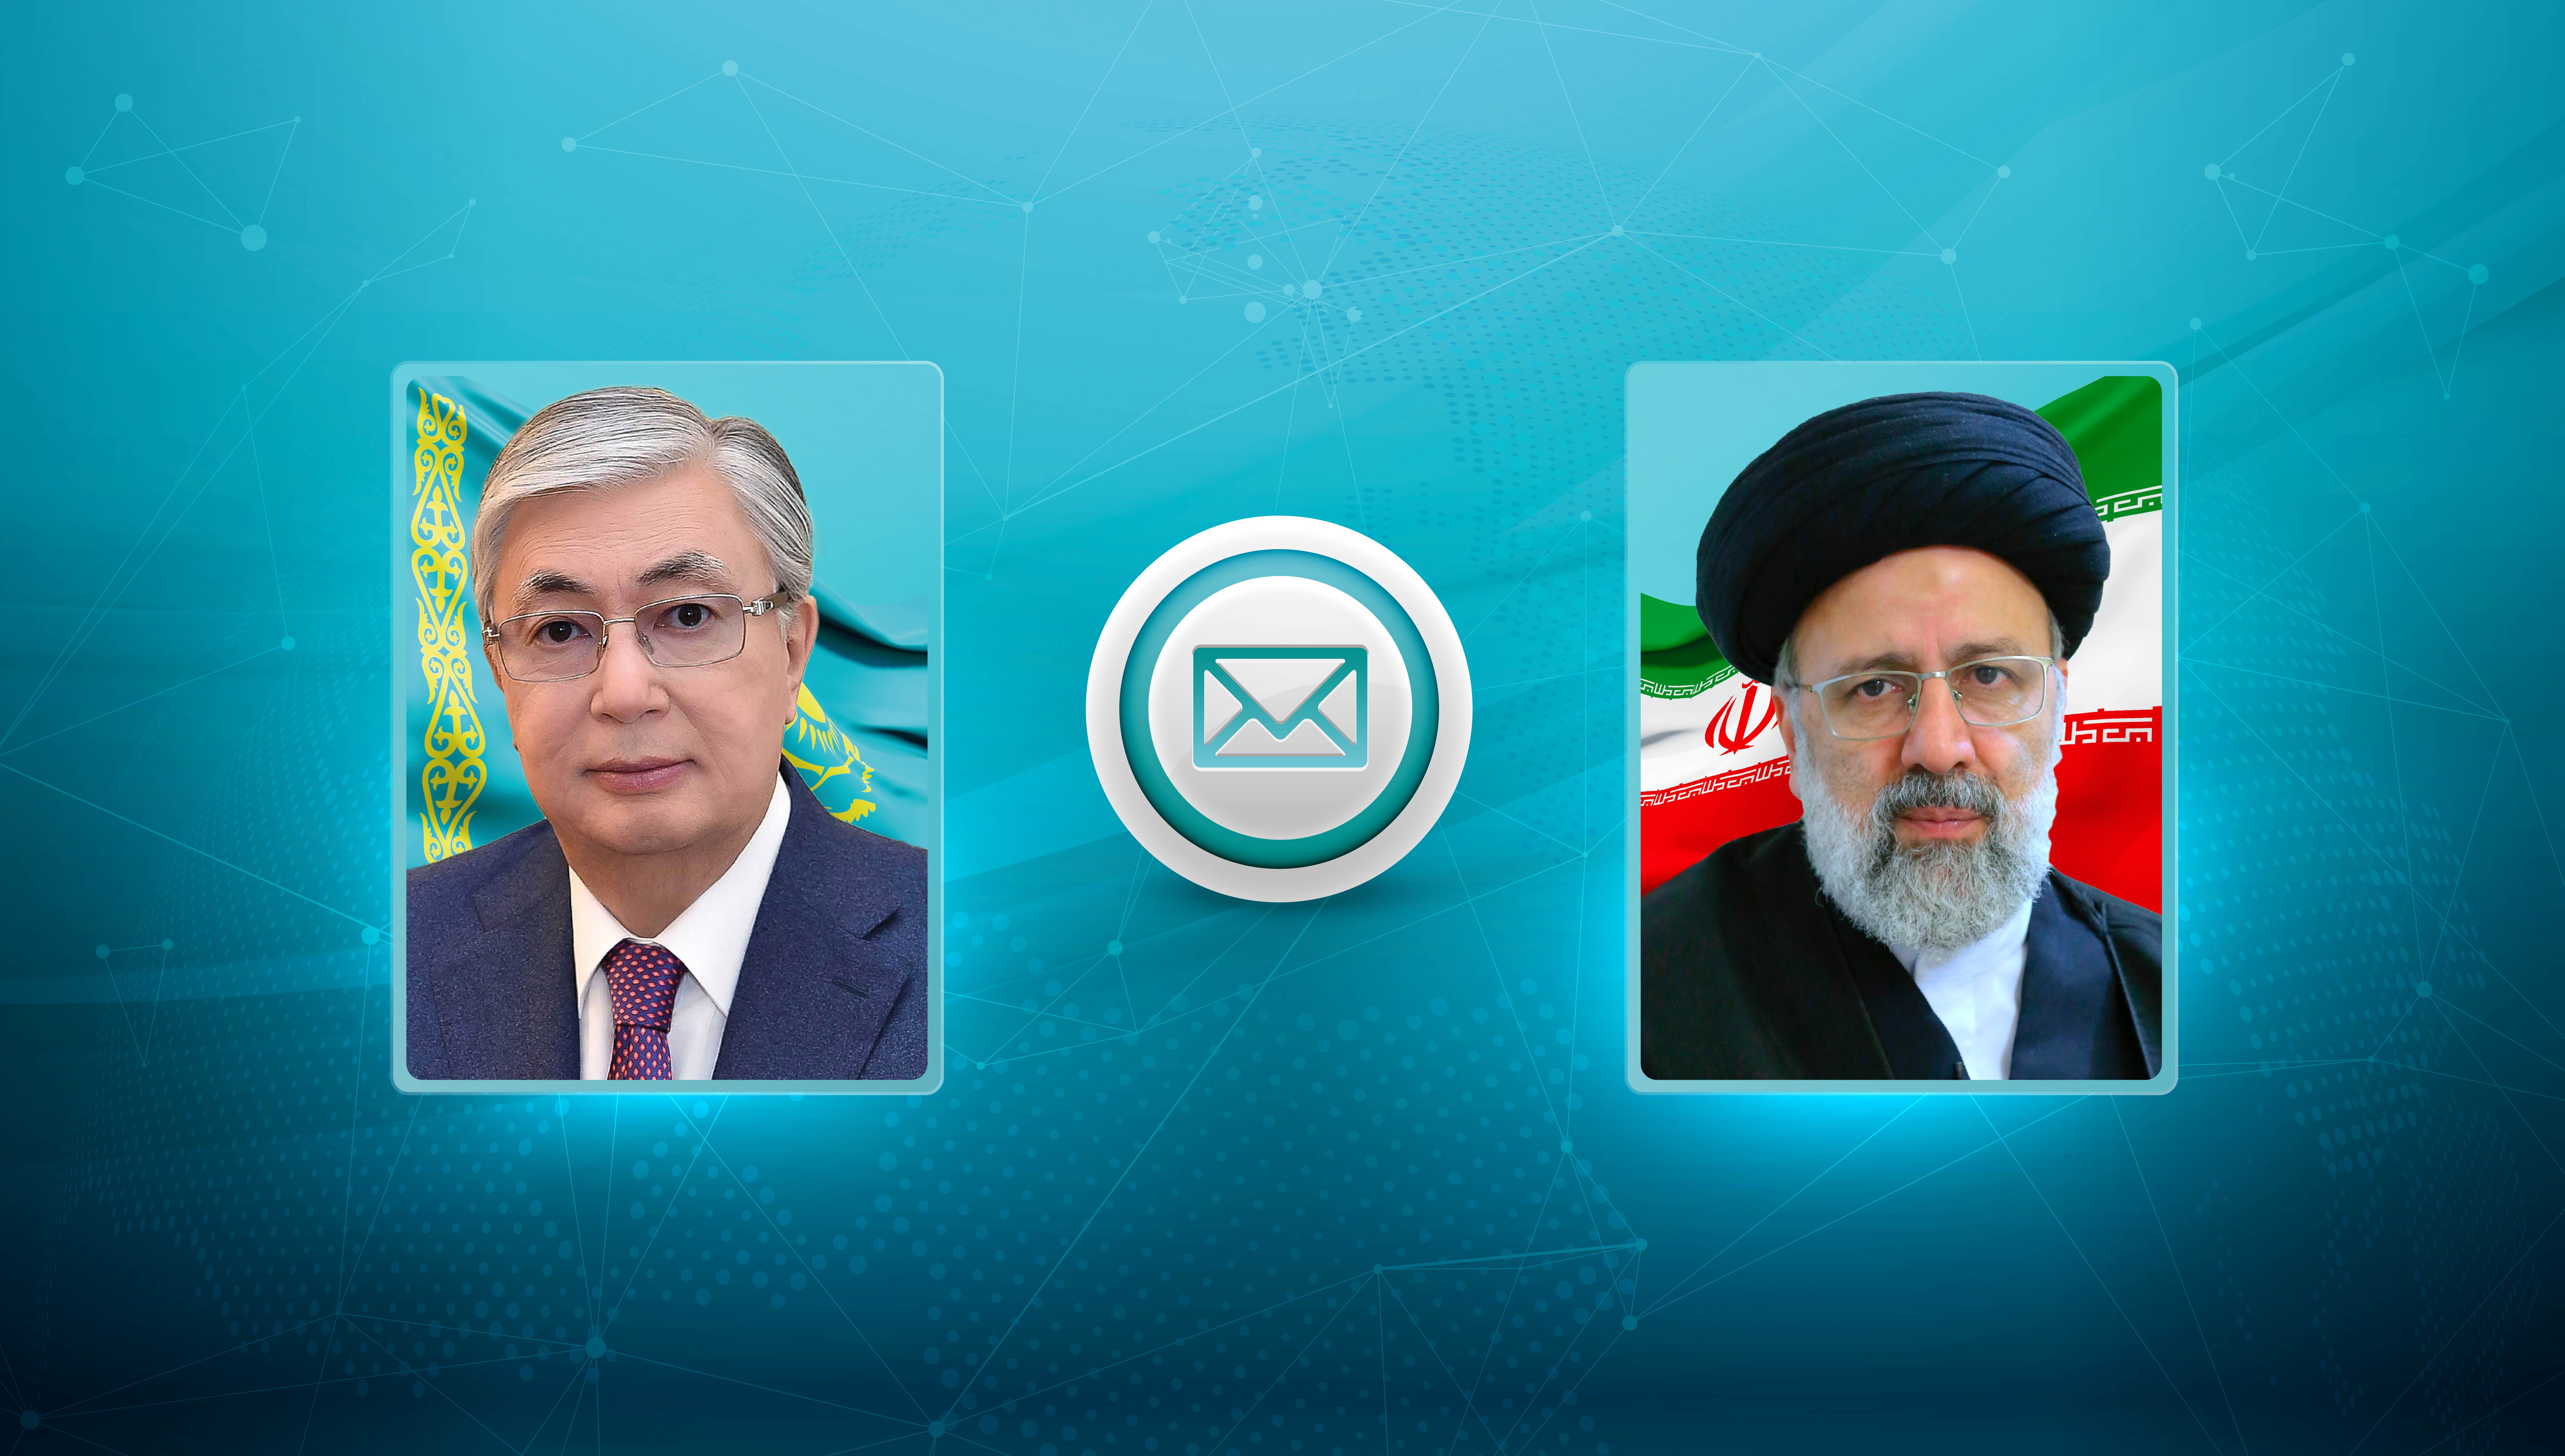 The Head of State sent a congratulatory telegram to the President of the Islamic Republic of Iran